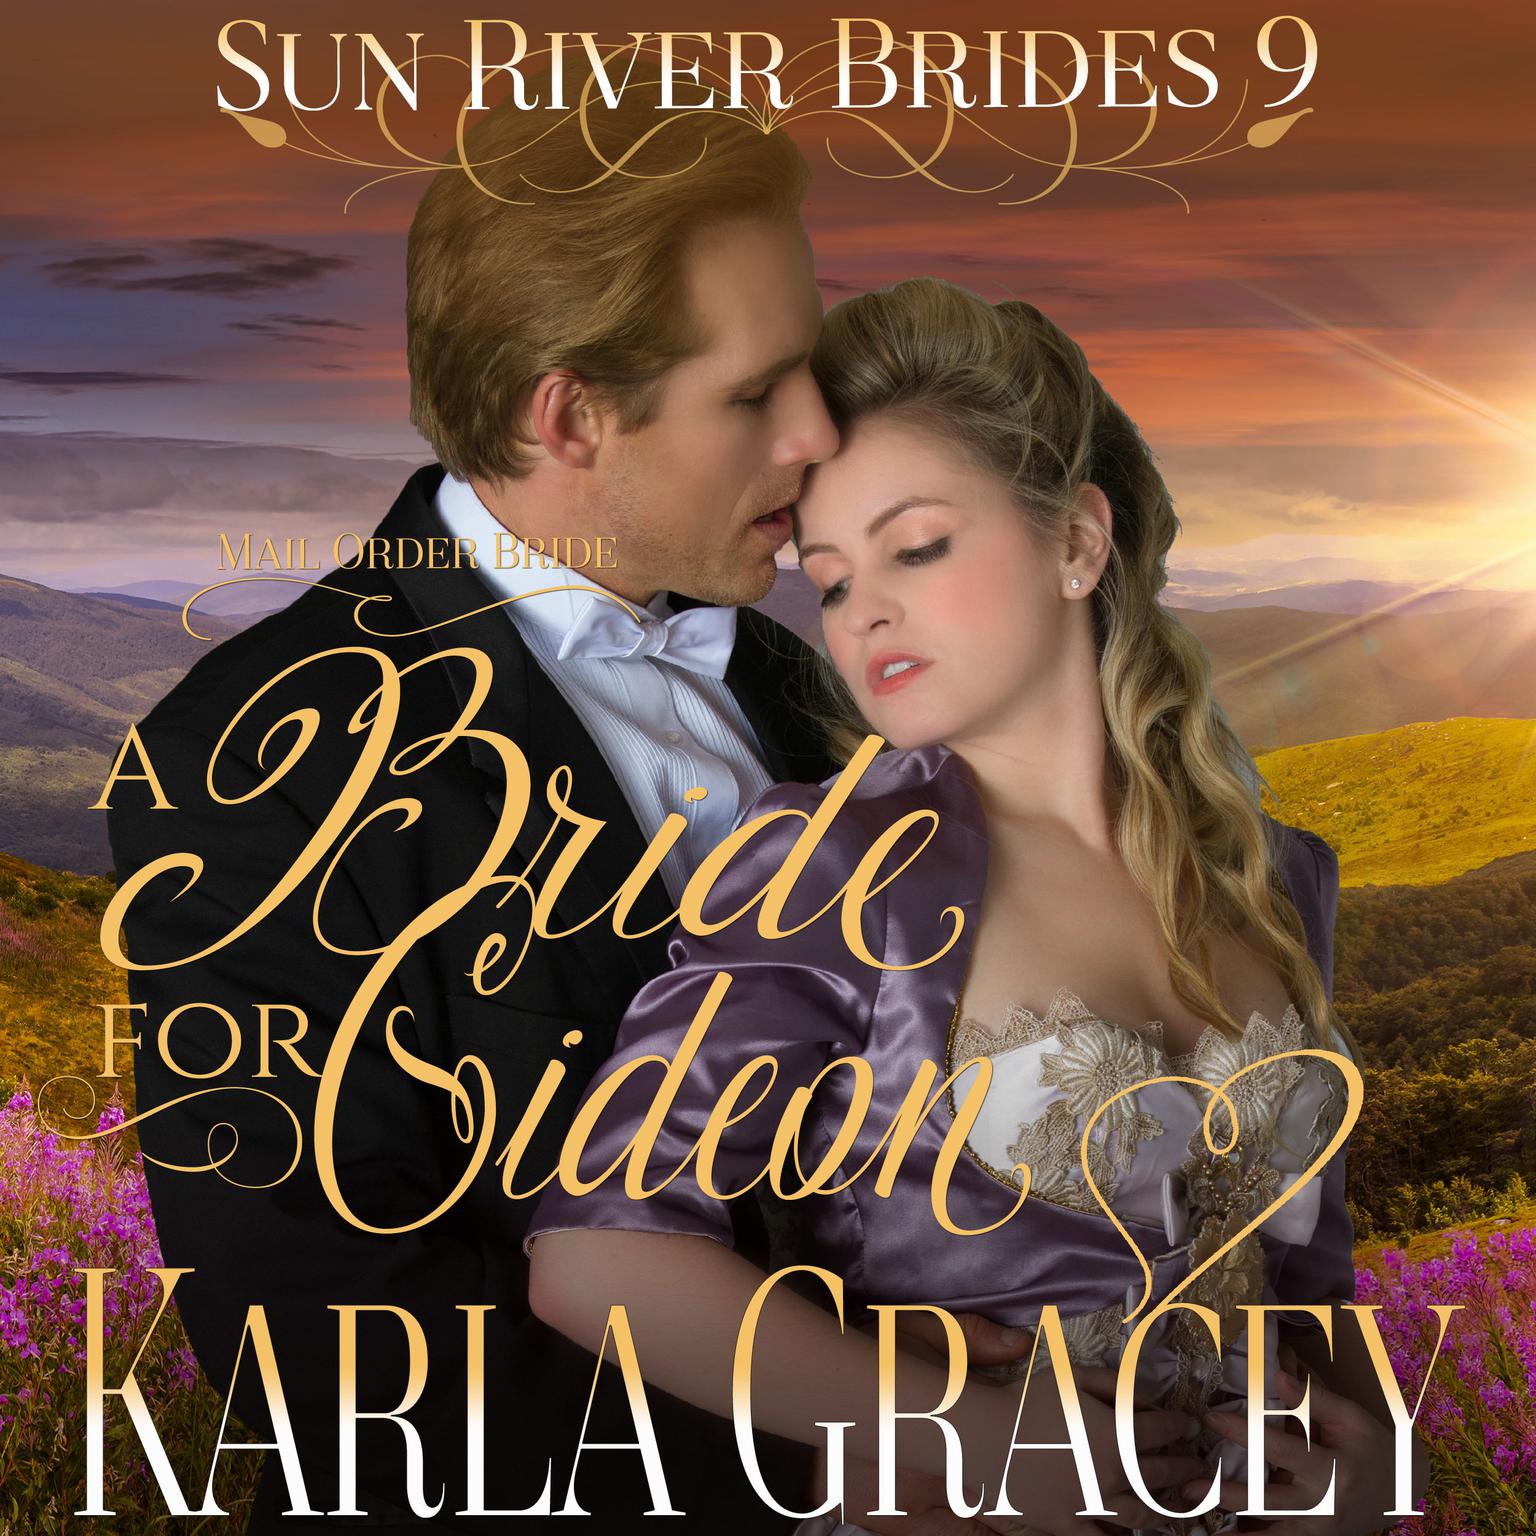 Mail Order Bride - A Bride for Gideon (Sun River Brides, Book 9) Audiobook, by Karla Gracey